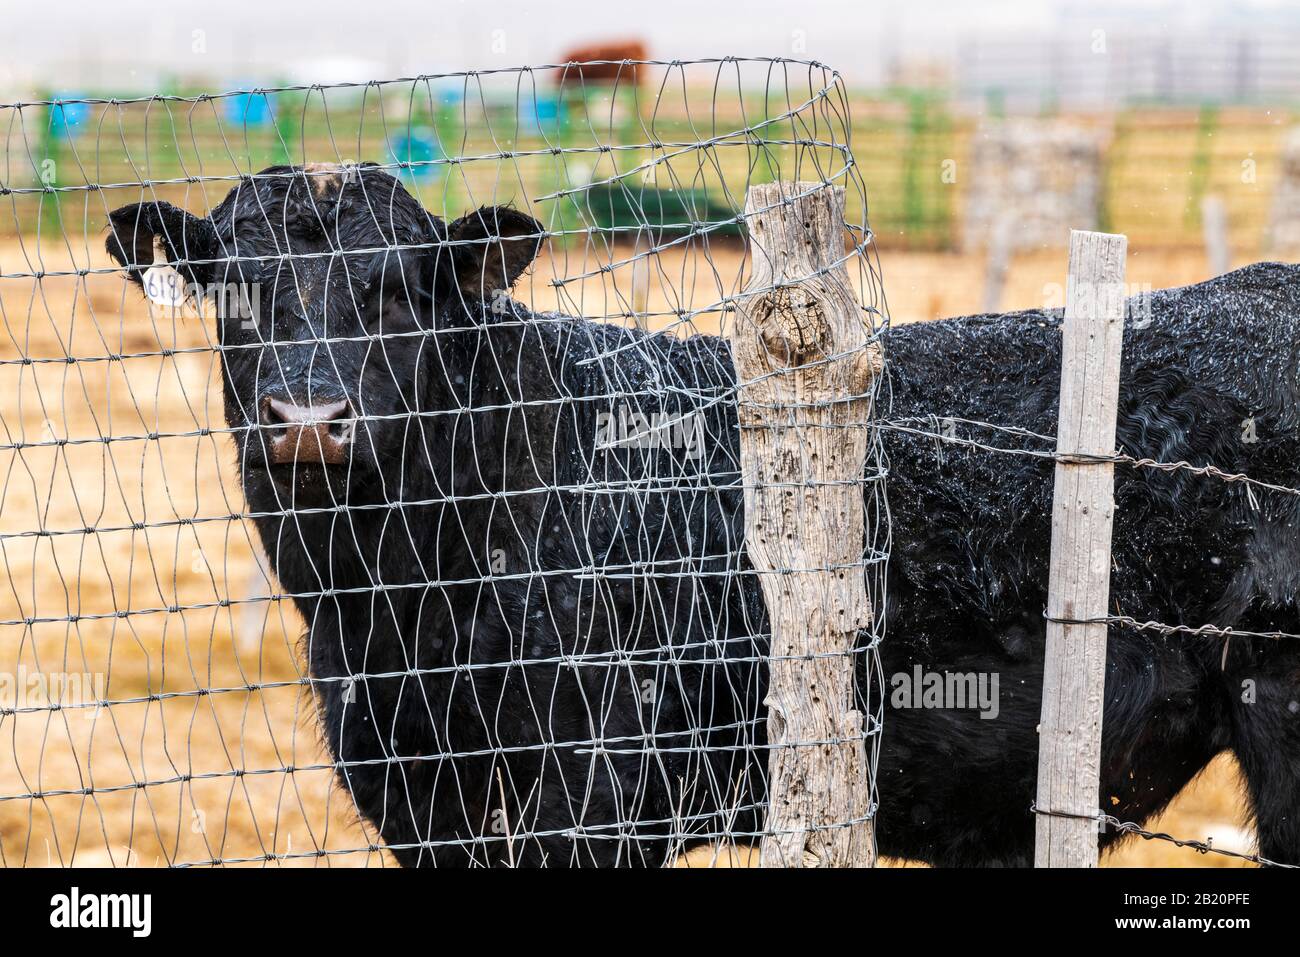 Black Angus cow seen through wire mesh fence Stock Photo